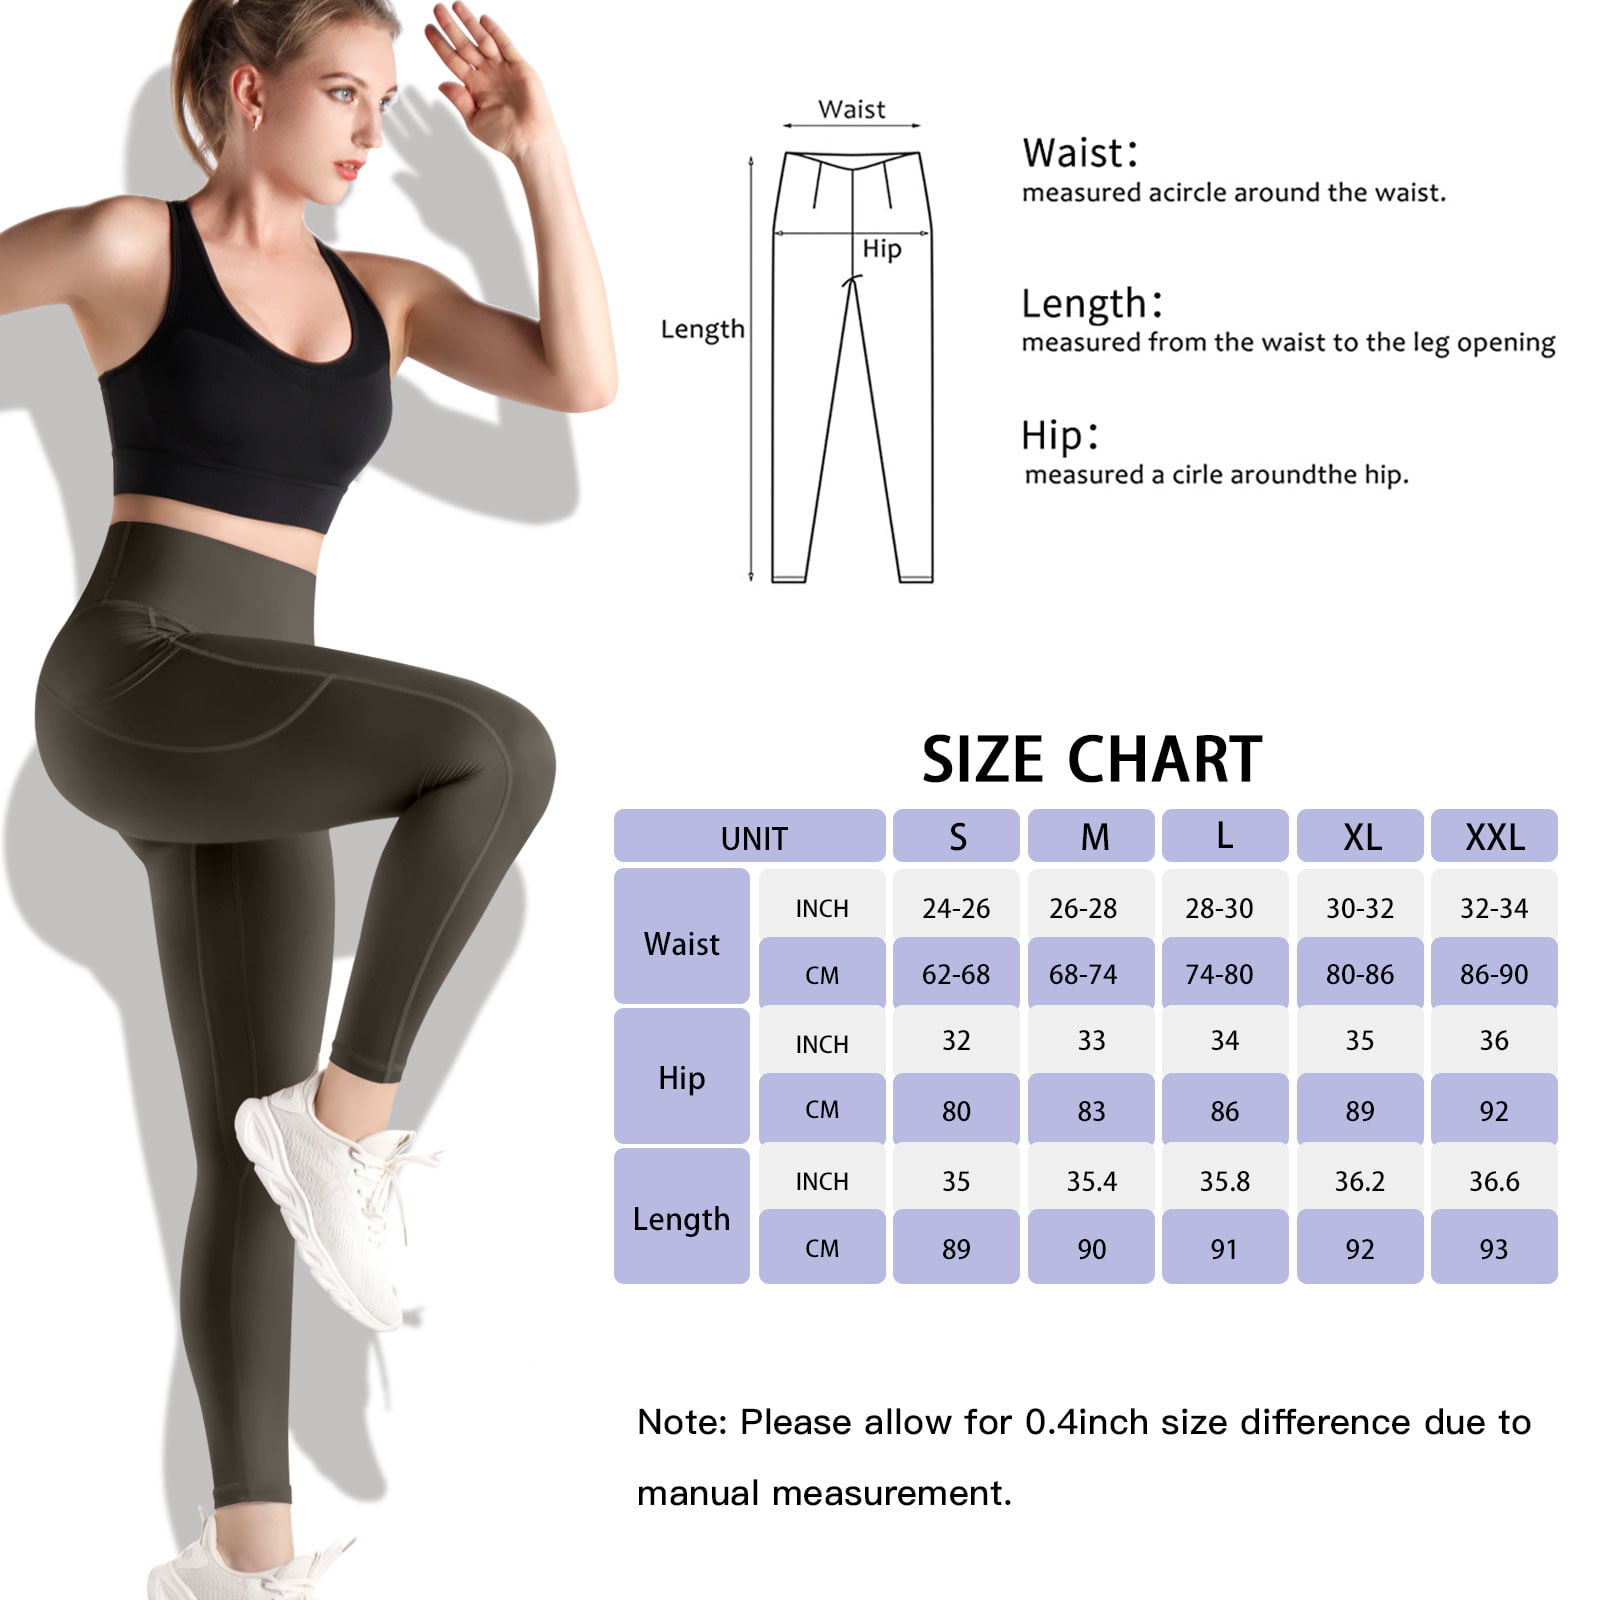 Wenini Leggings with Pockets for Women, Women's Yoga Pants High Waisted Leggings Tummy Control Athletic Workout Pants Joggers for Women Flash Sales Today